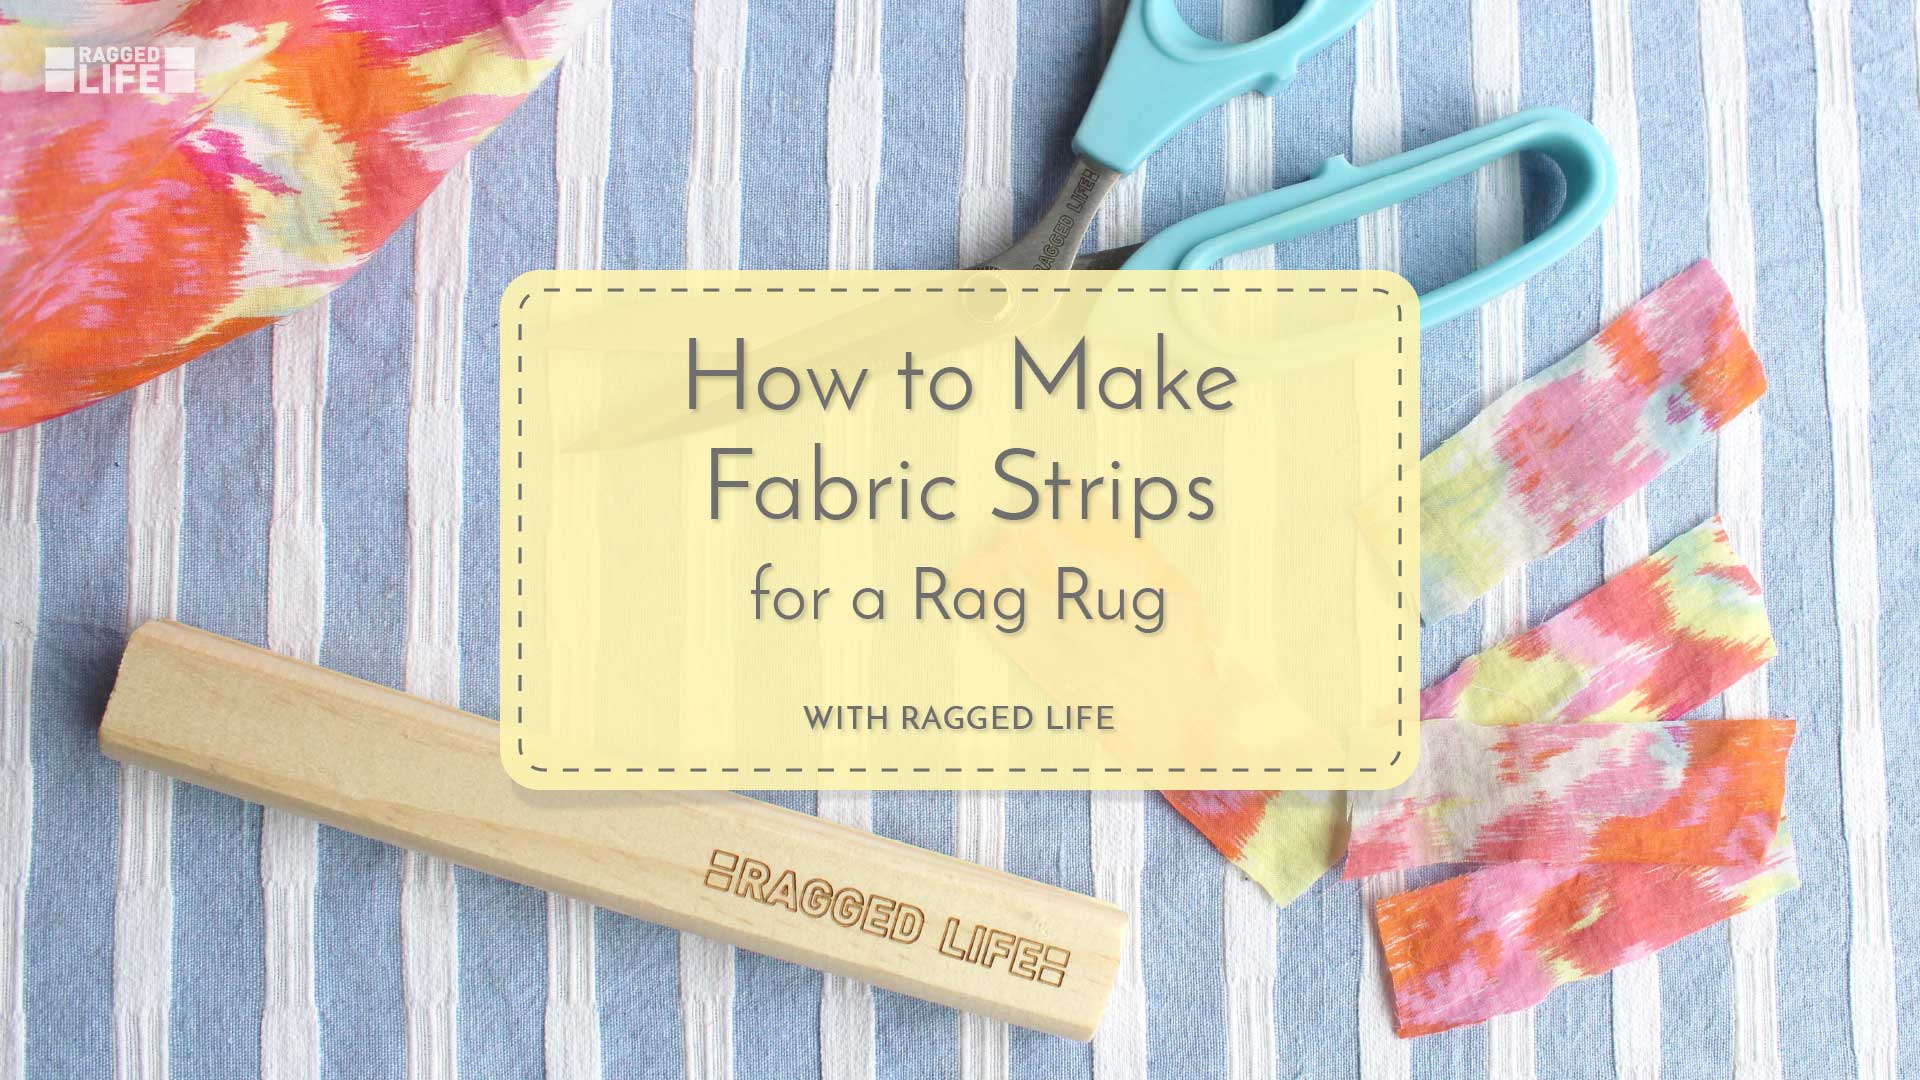 How to make strips for a rag rug video with Ragged Life on YouTube